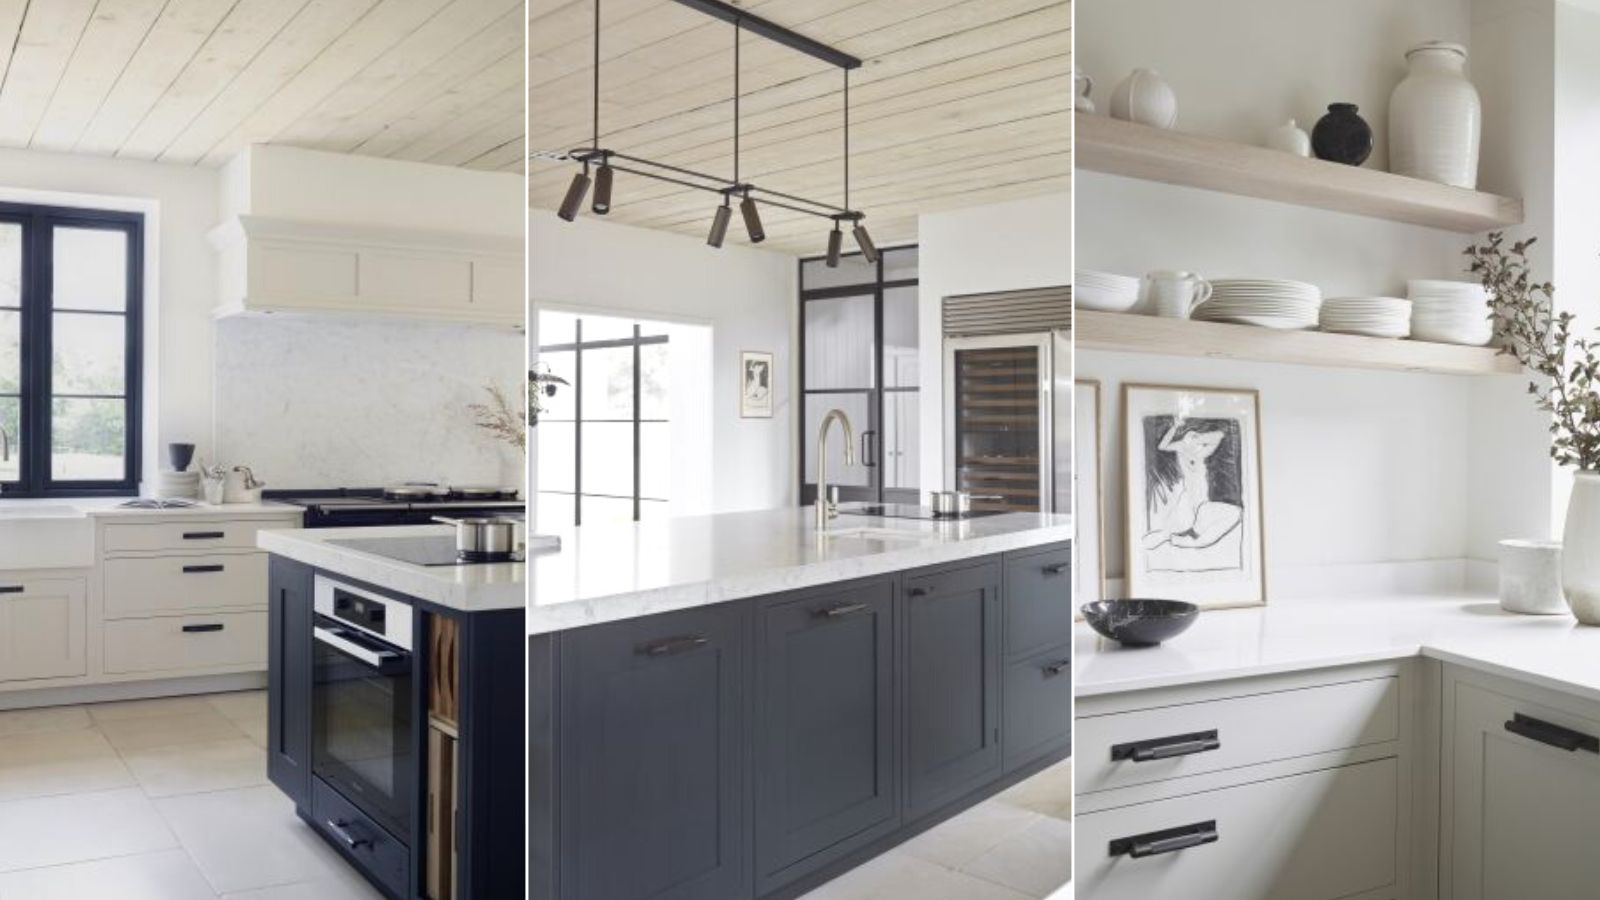 7 Lessons In Modern Farmhouse Style The Designer Of This Elegant Kitchen  Wants Us To Learn |